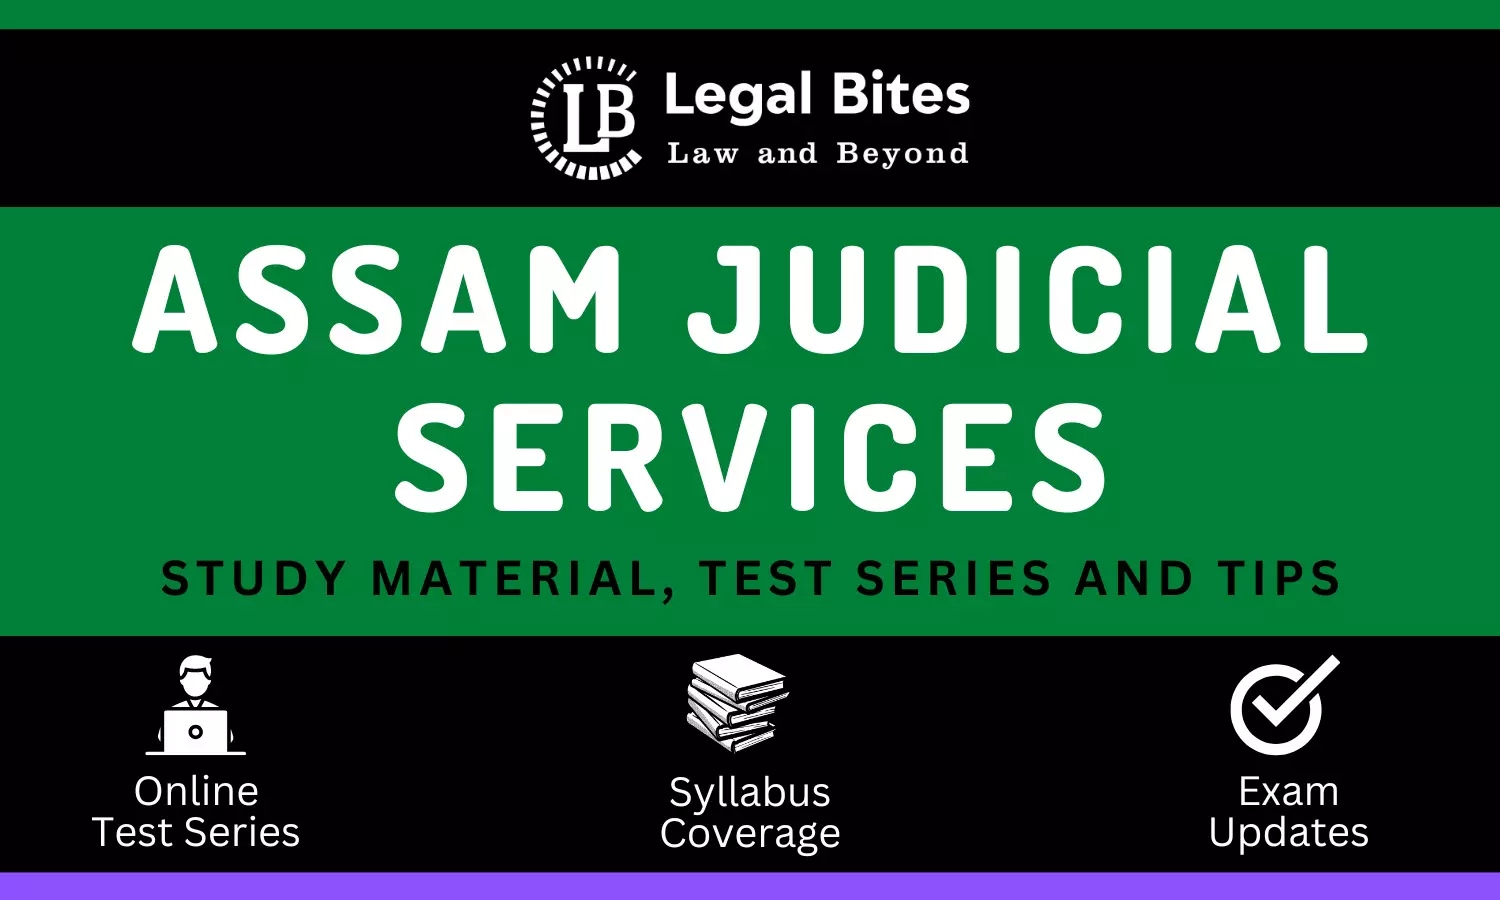 Assam Judicial Services: Study Material, Test Series and Tips